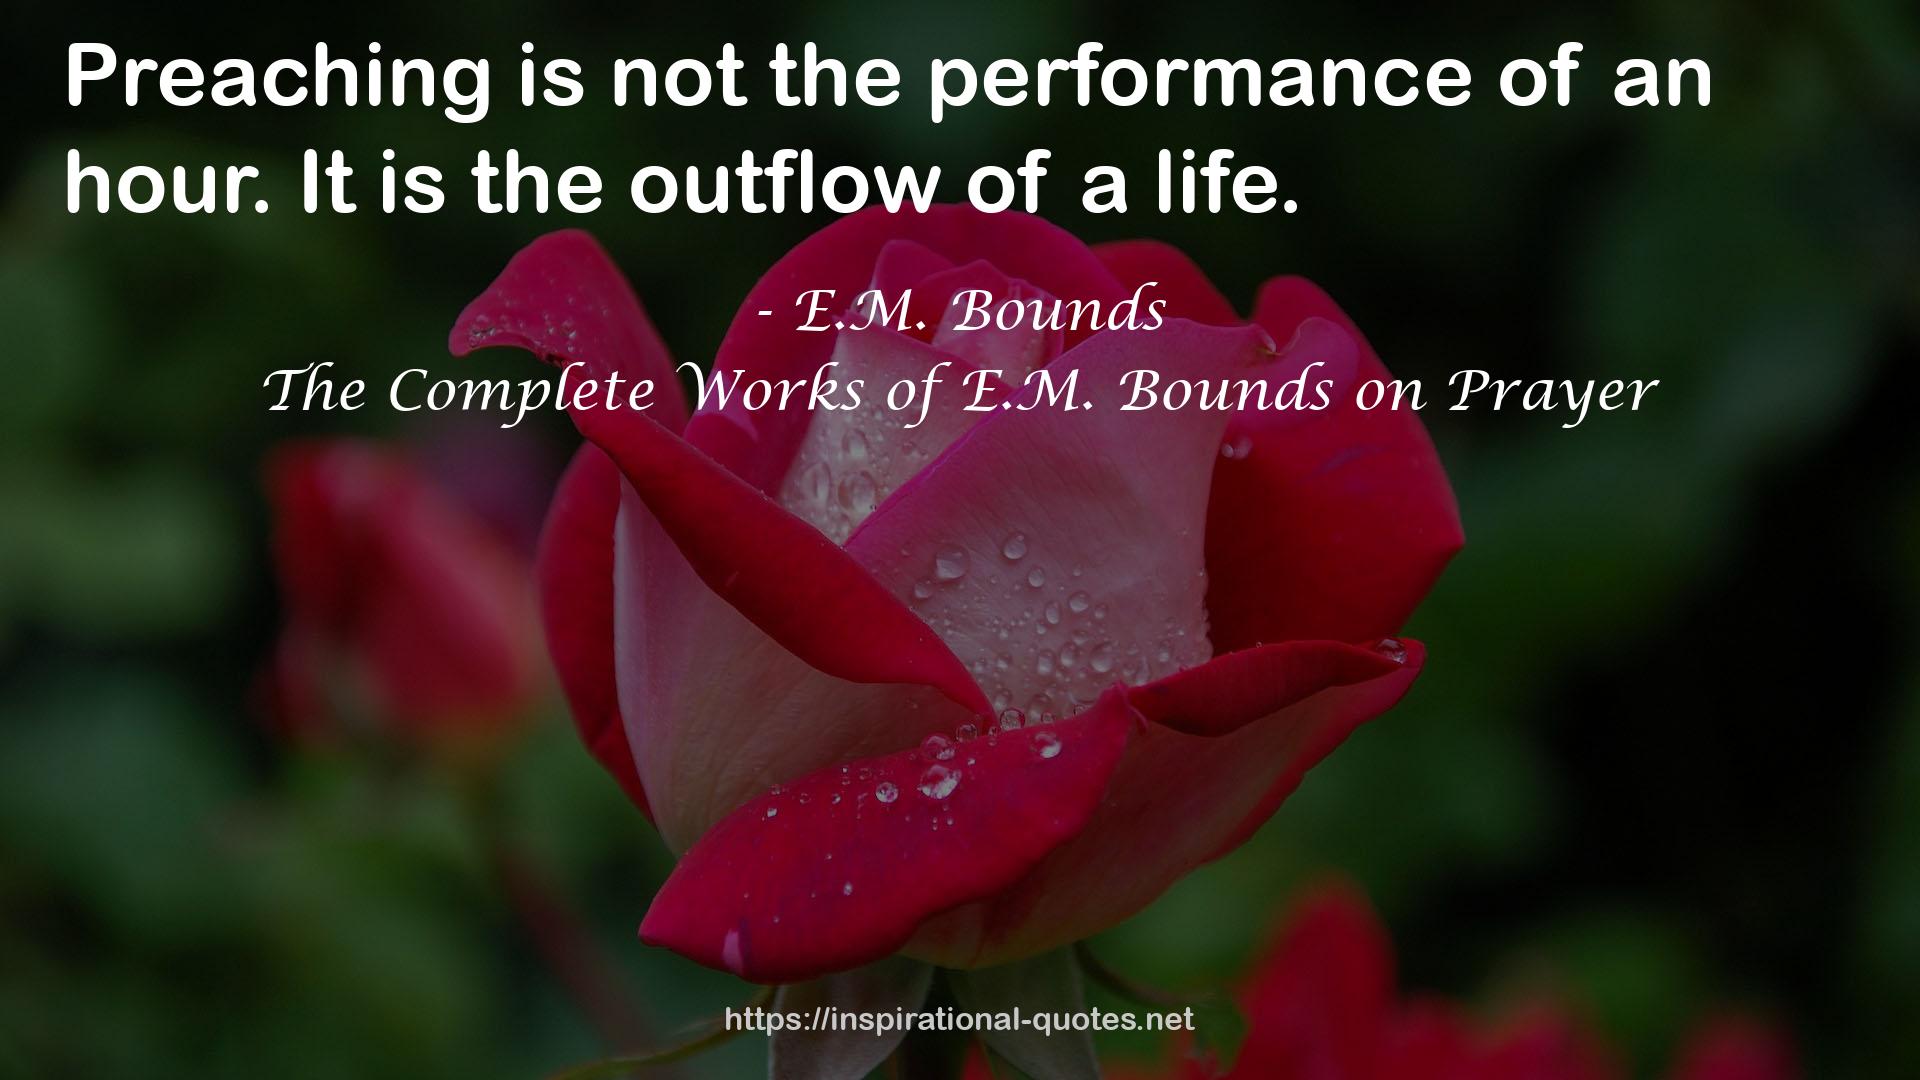 E.M. Bounds QUOTES